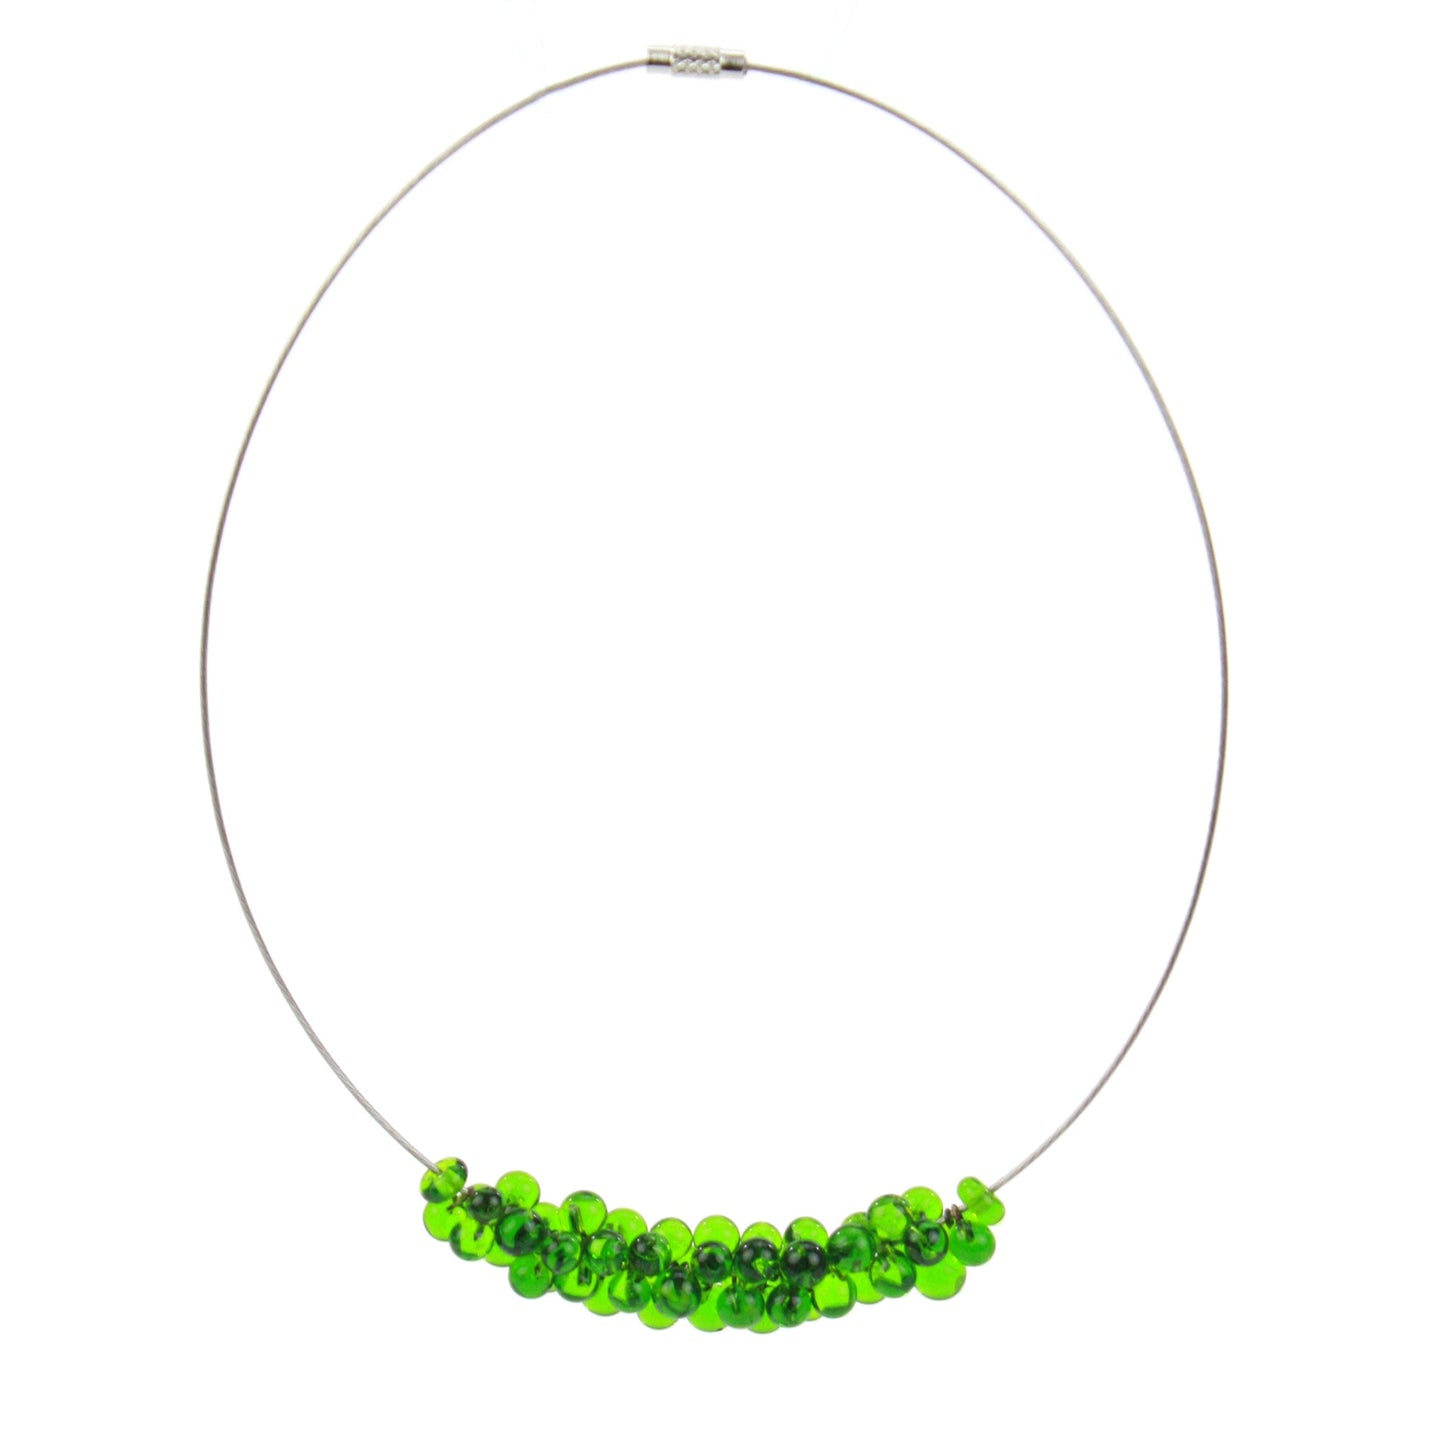 Petite Chroma Necklace in Green